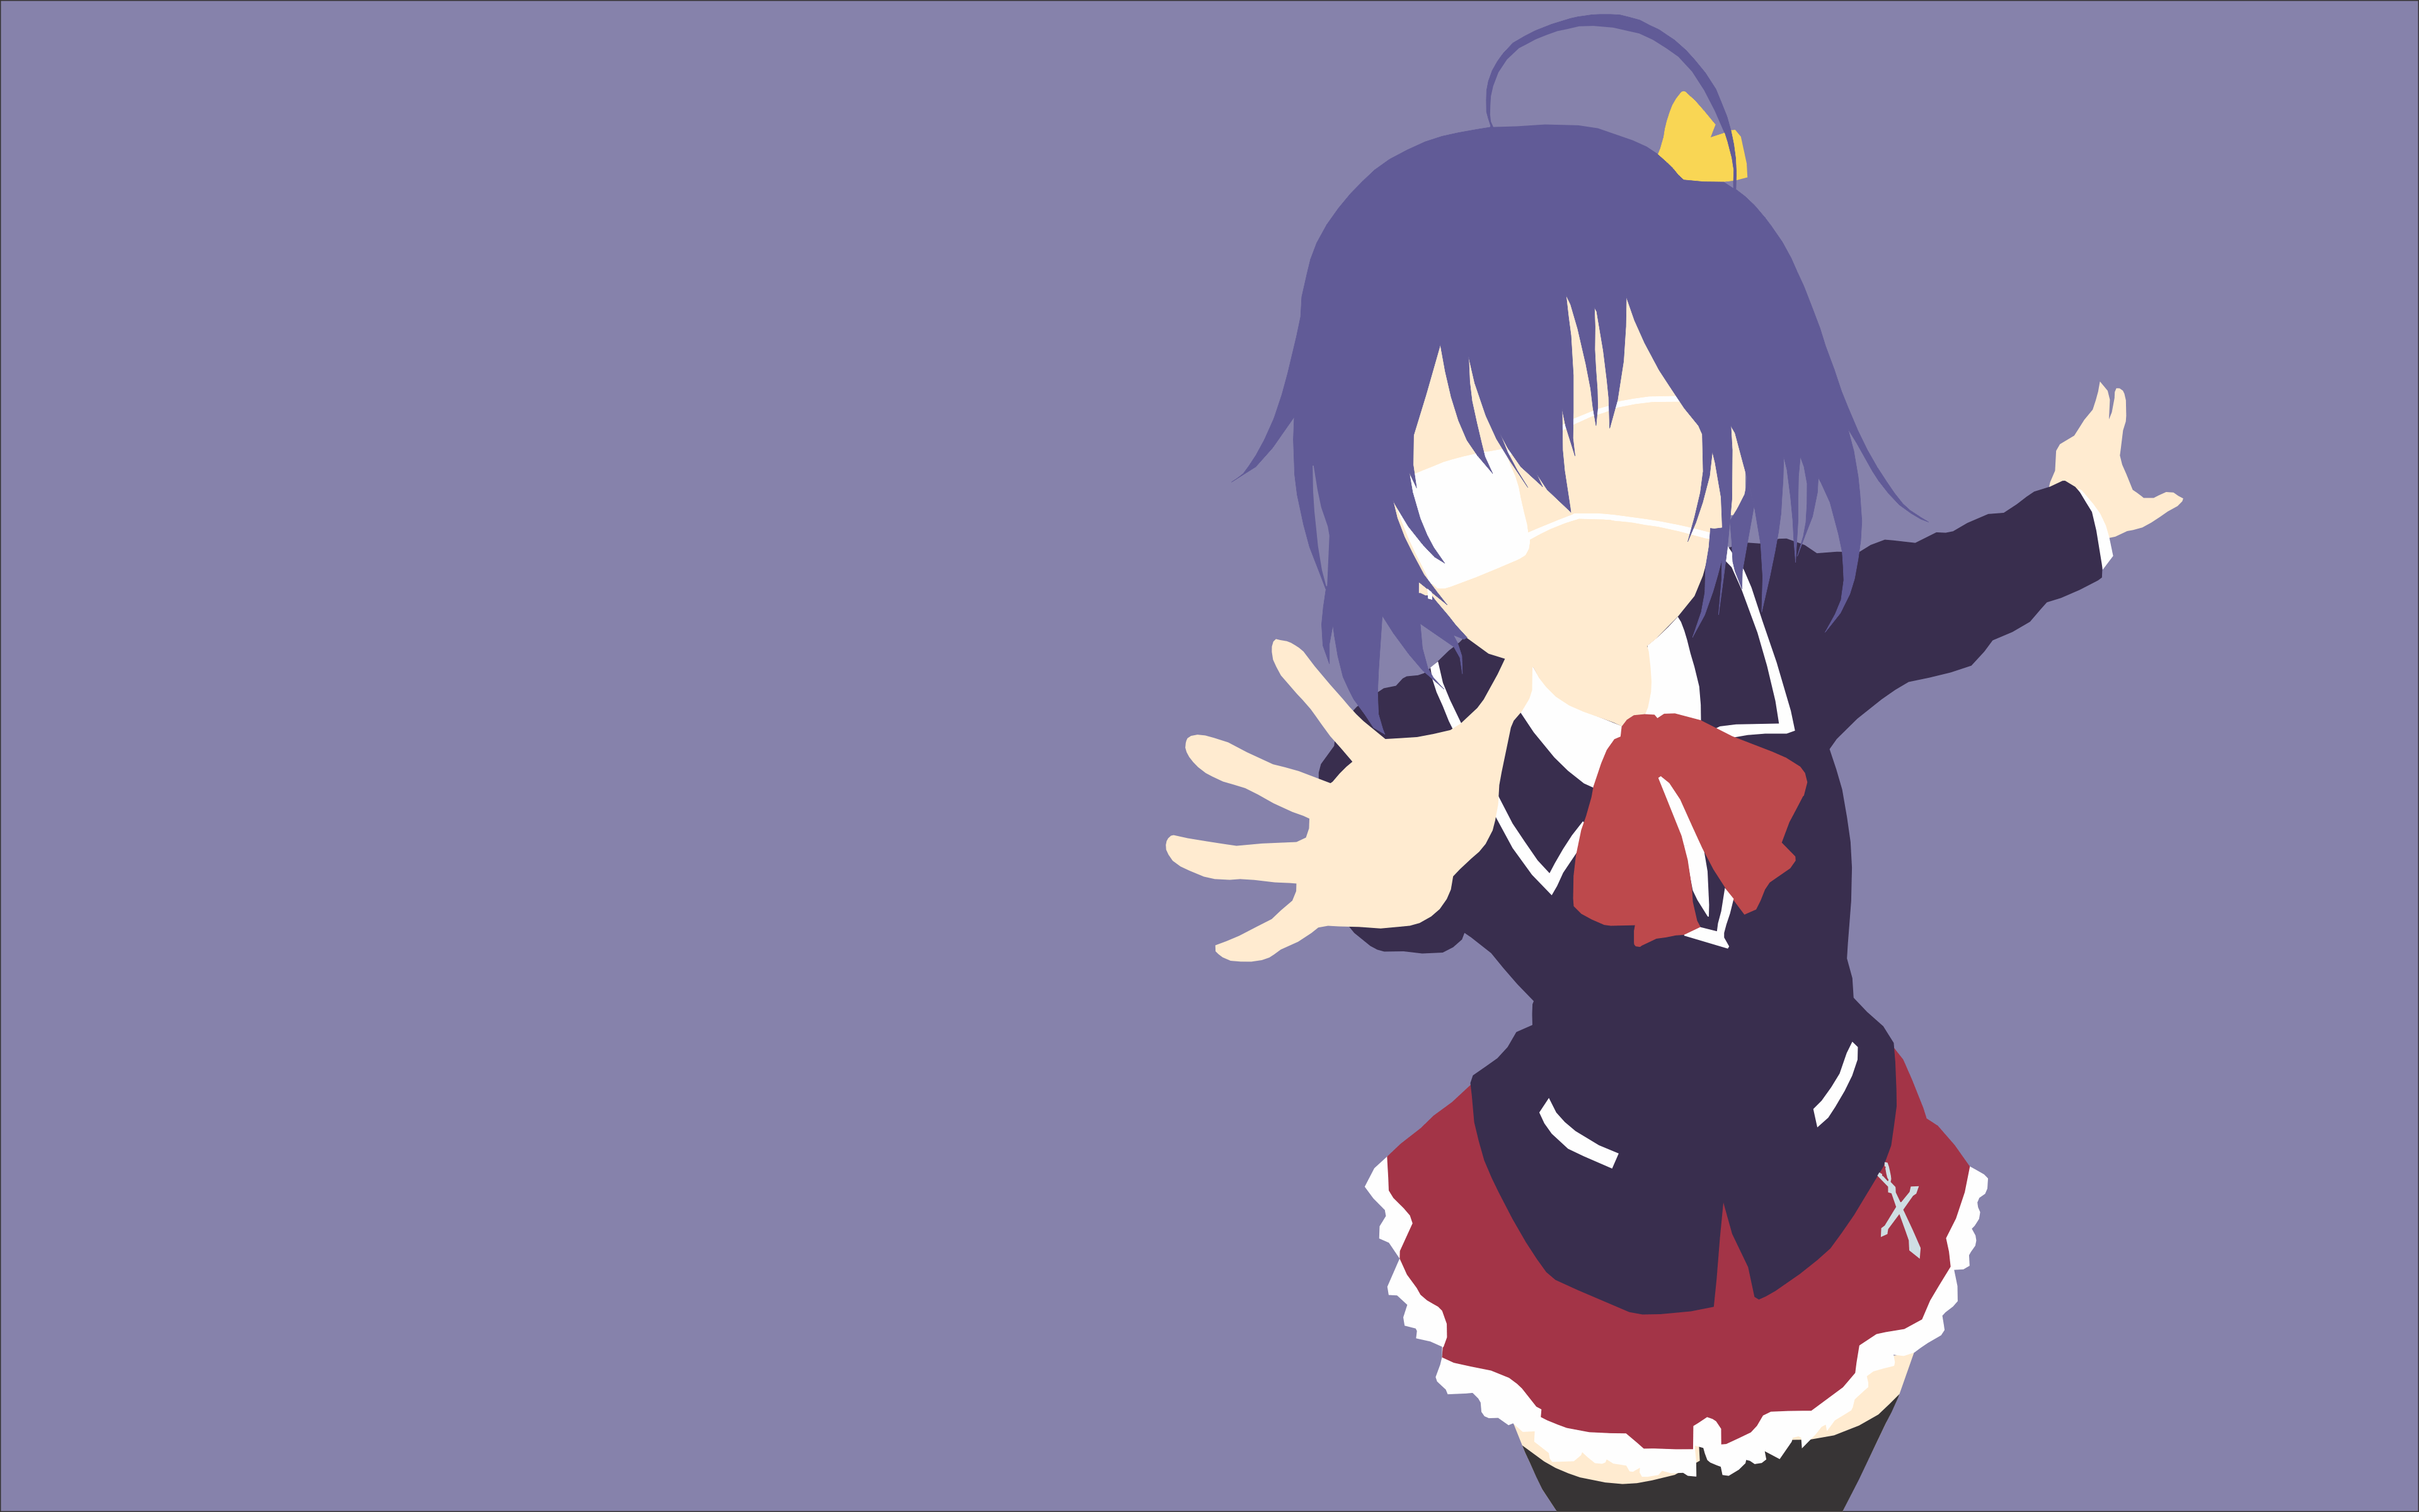 I tried my hand at making vector wallpaper and made that